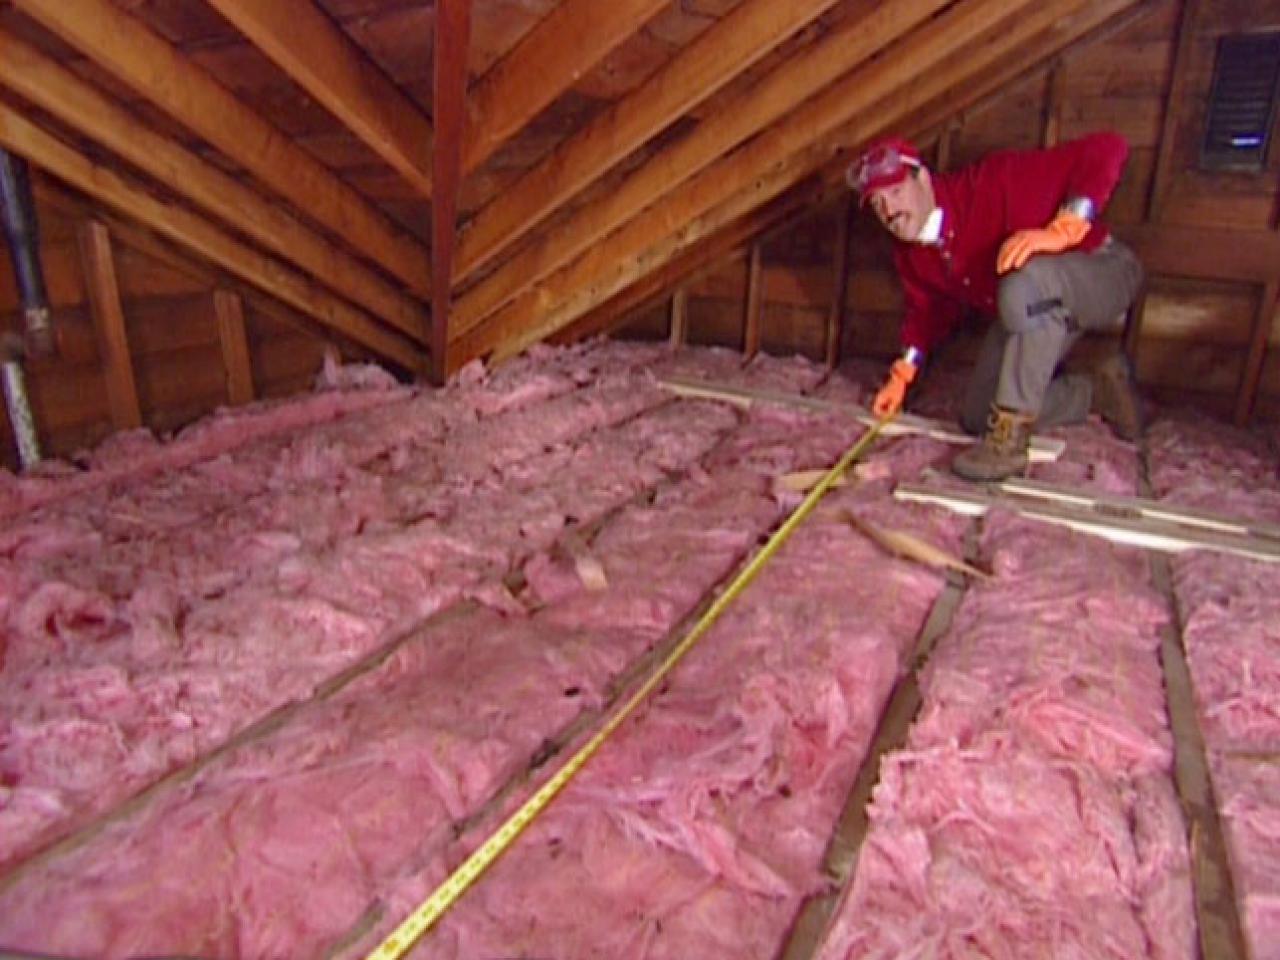 http://www.diynetwork.com/how-to/rooms-and-spaces/walls-and-ceilings/how-to-install-fiberglass-insulation